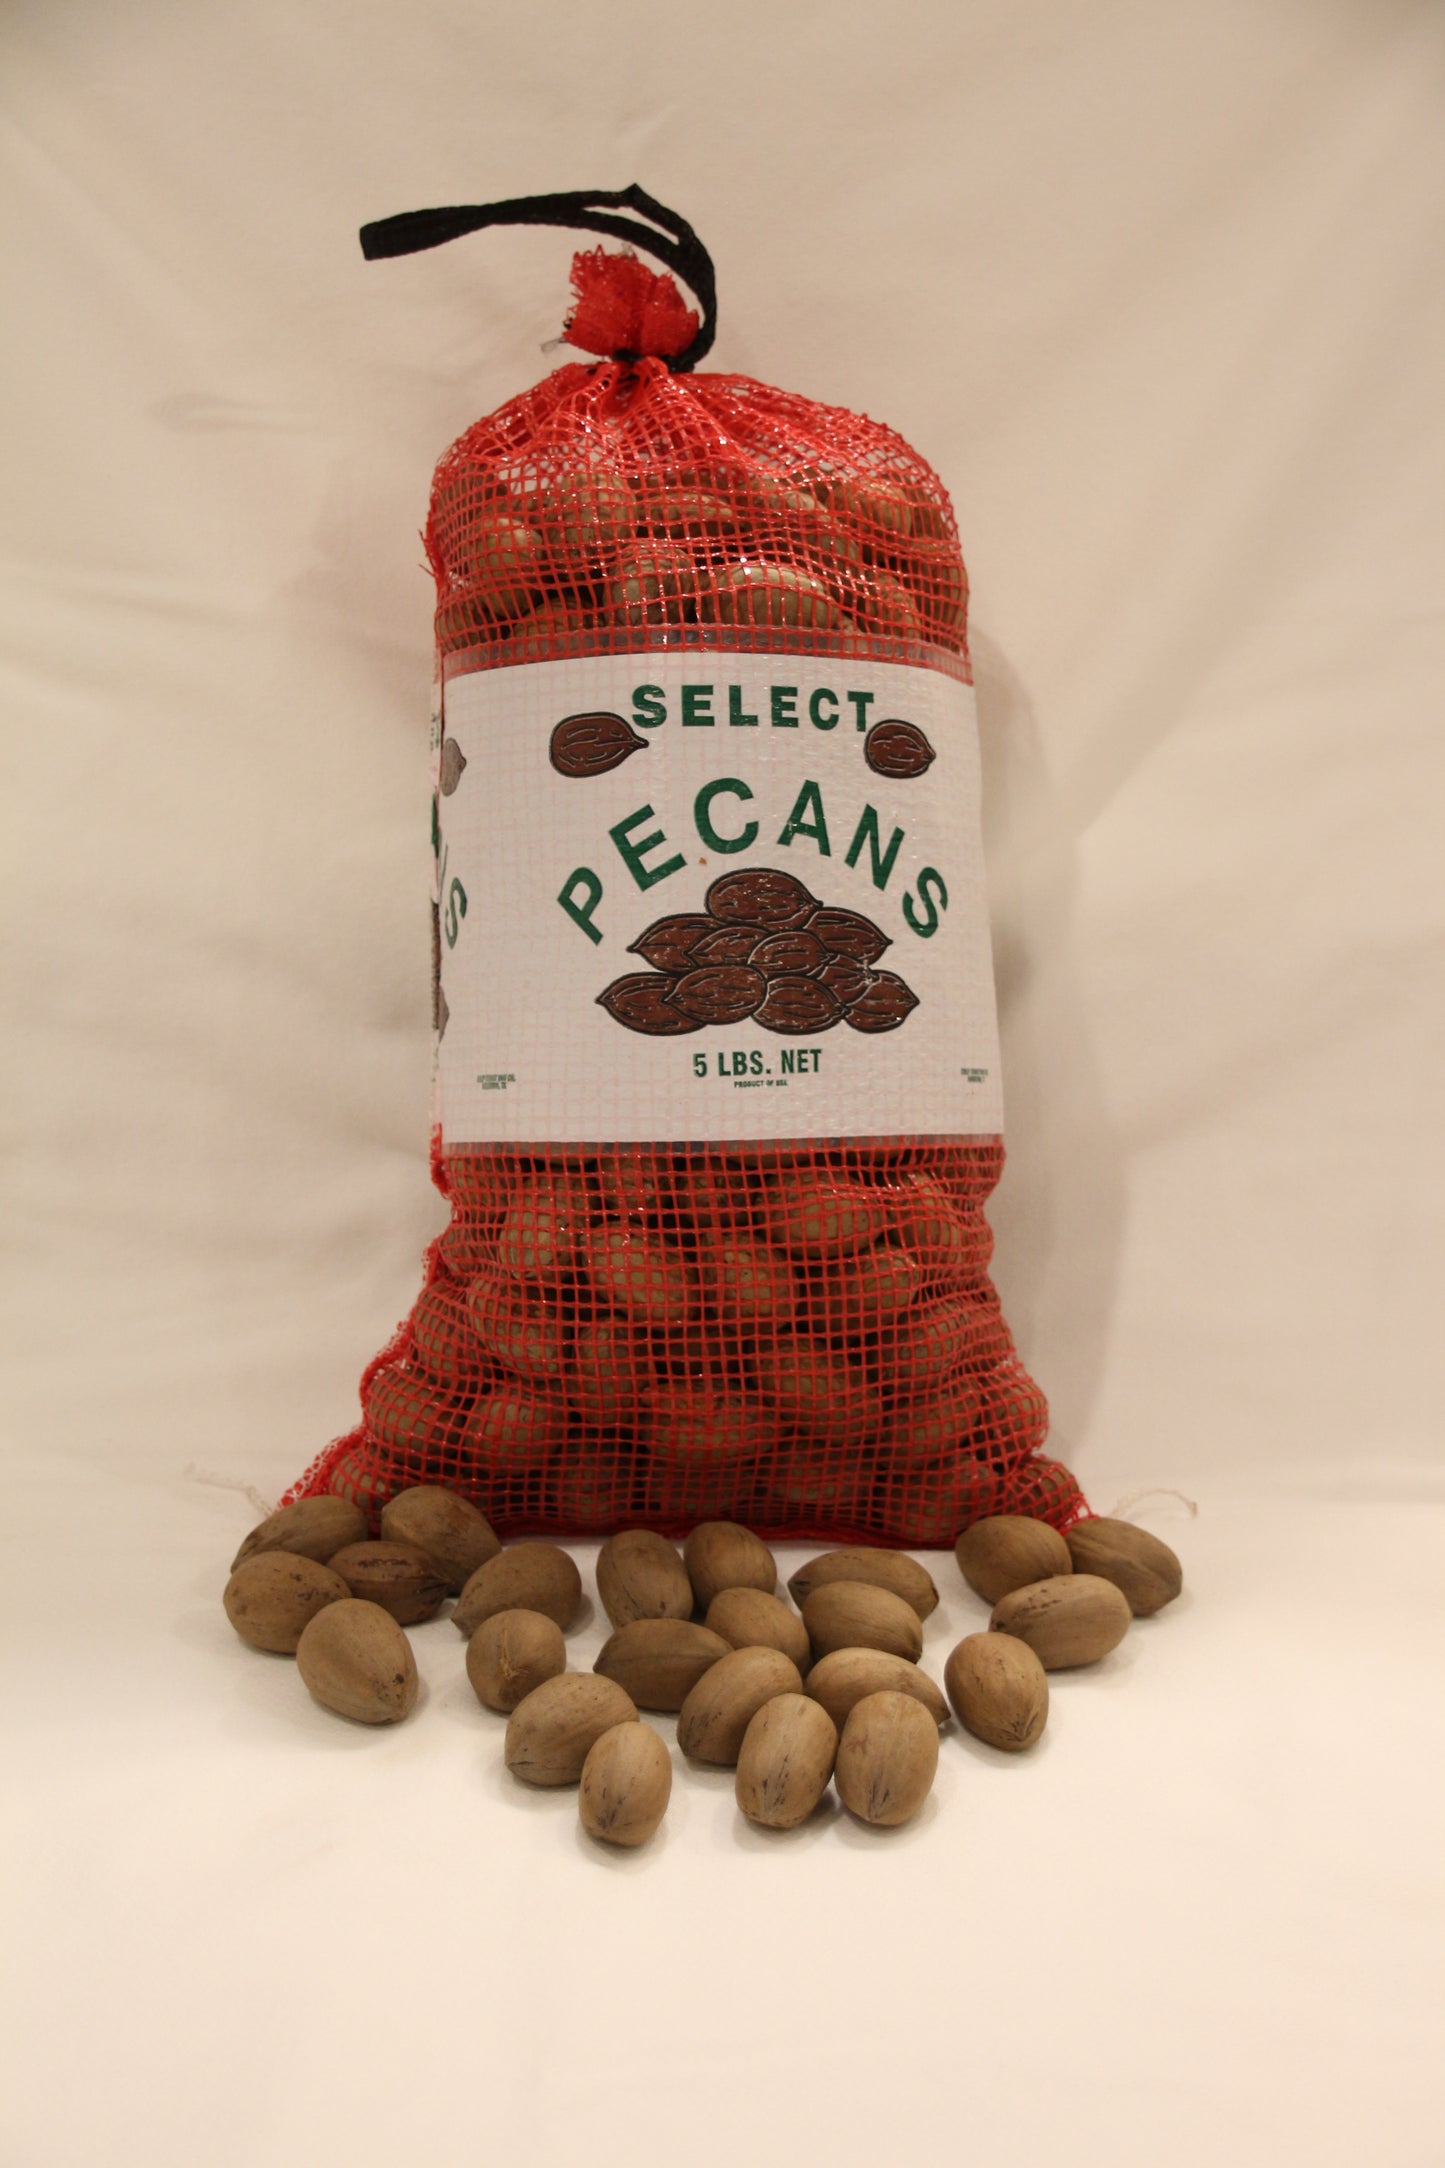 In Shell Pawnee Pecans – 3, 5, 15, & 25 lbs